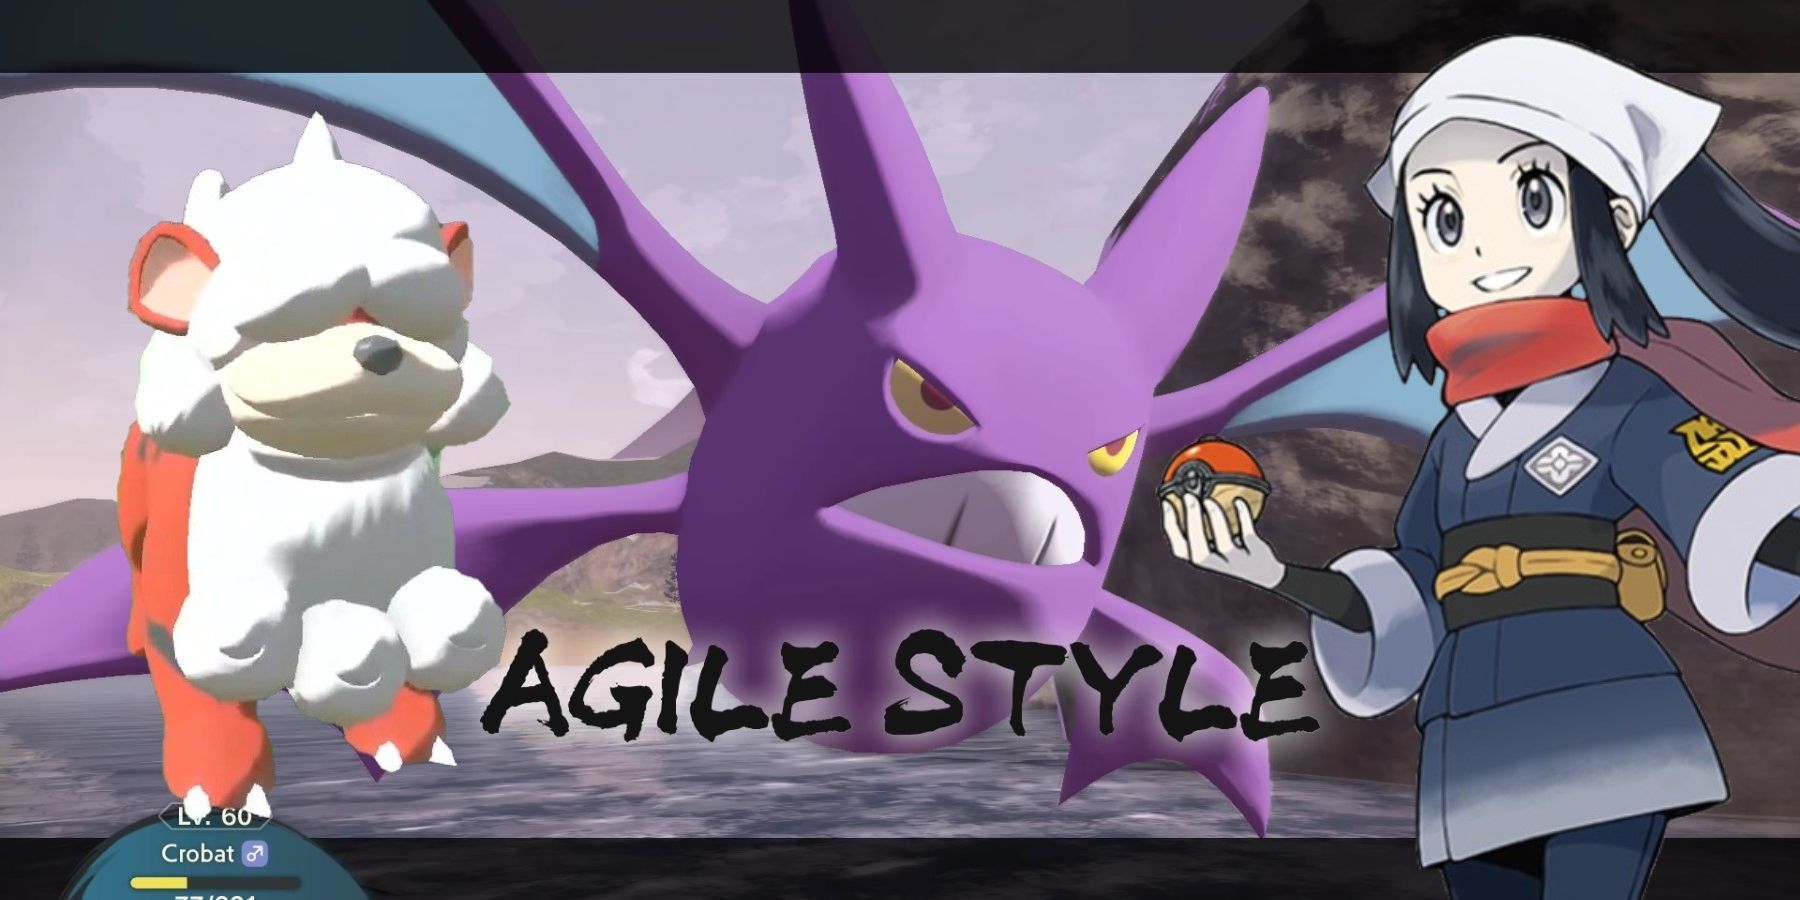 pokemon legends arceus strategy turn based combat rts games turn grid agile style strong style moves sneaking catching resource management pokemon battles future gen 9